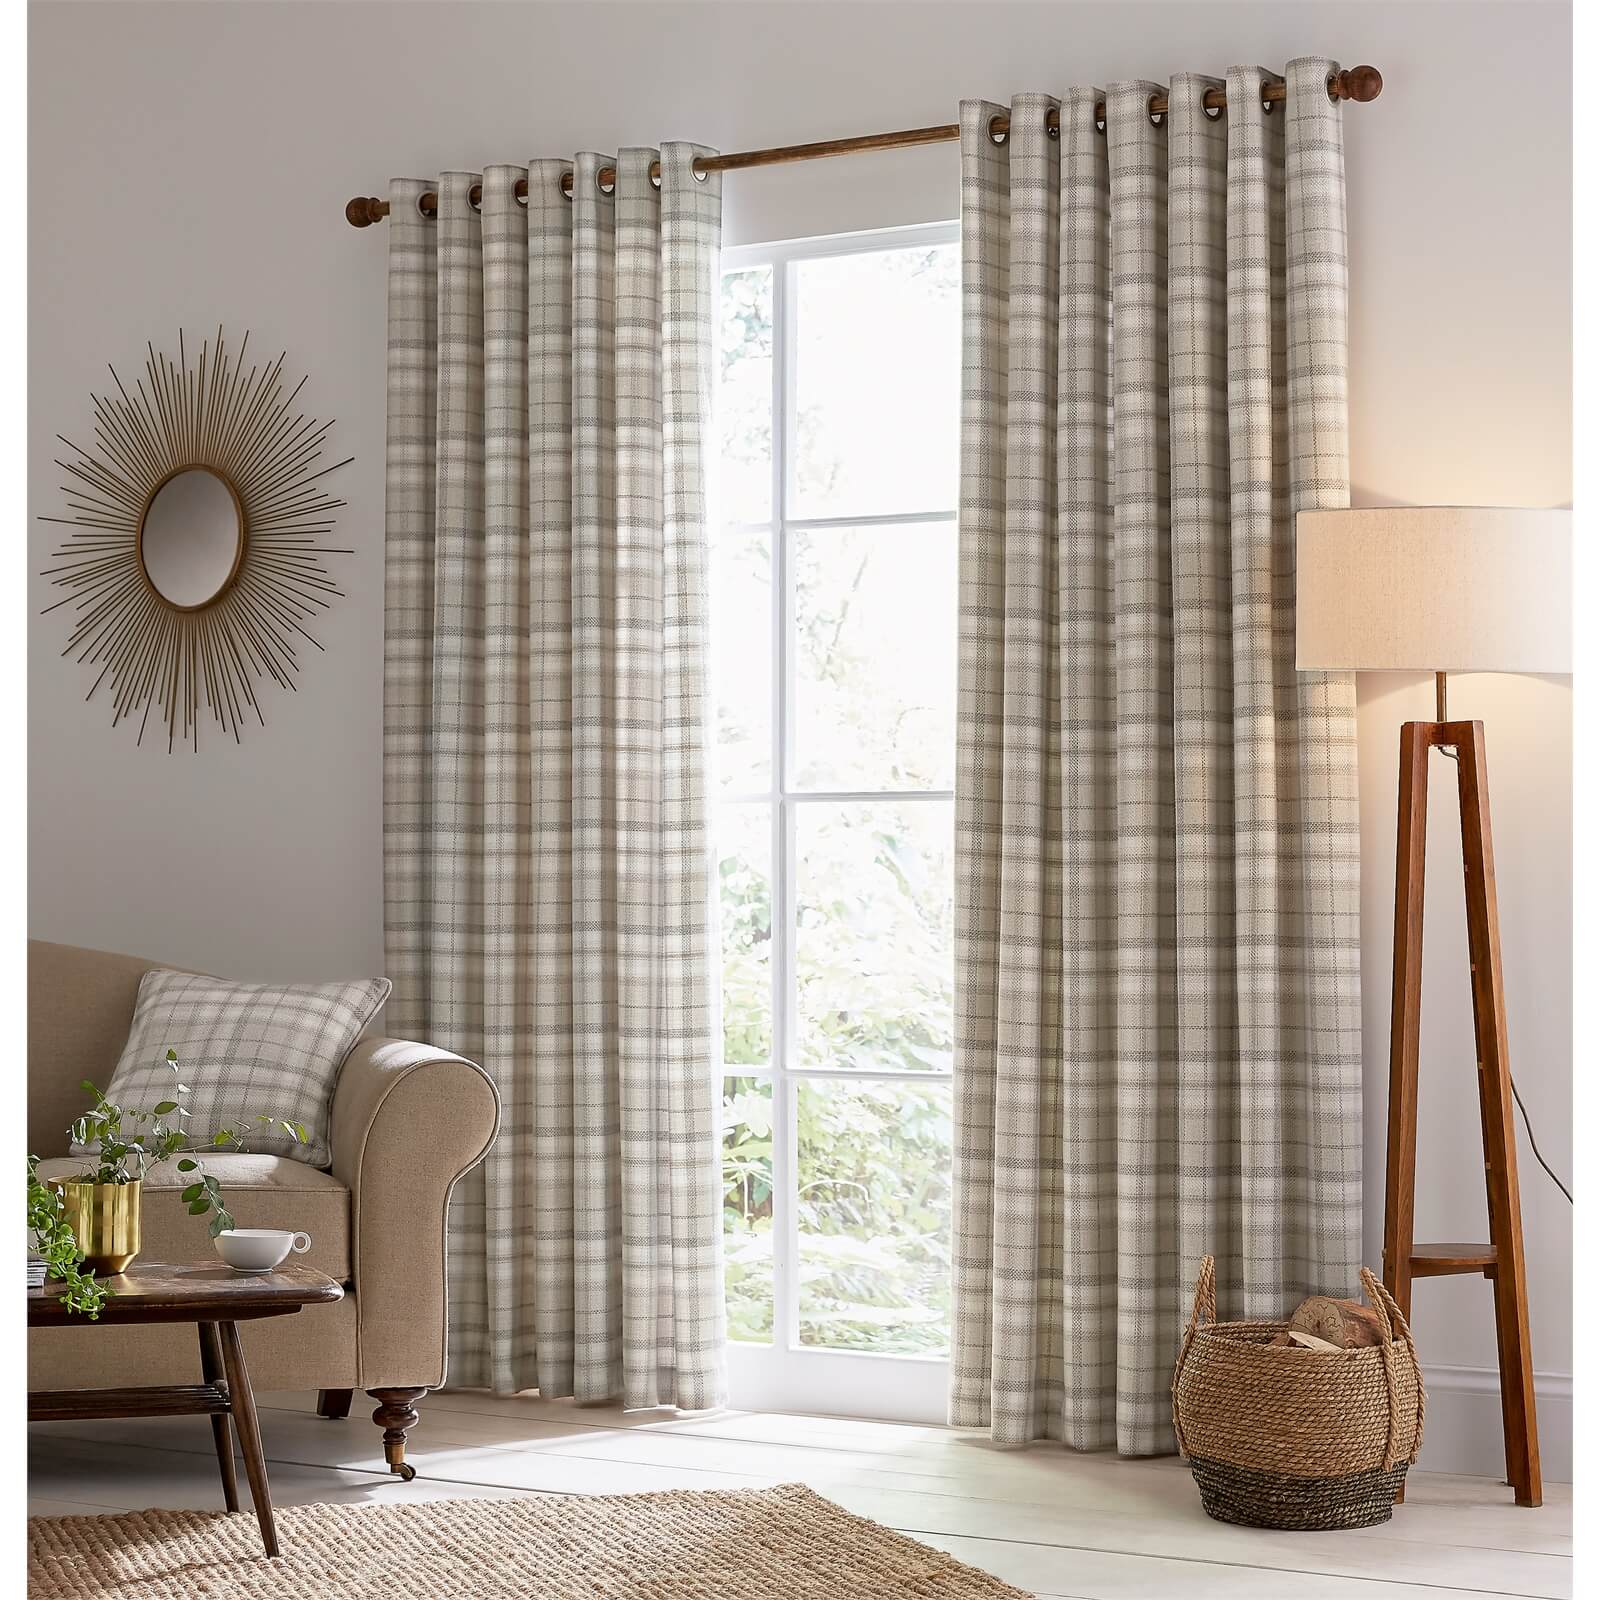 Helena Springfield Harriet Lined Curtains 66 x 72 - Taupe